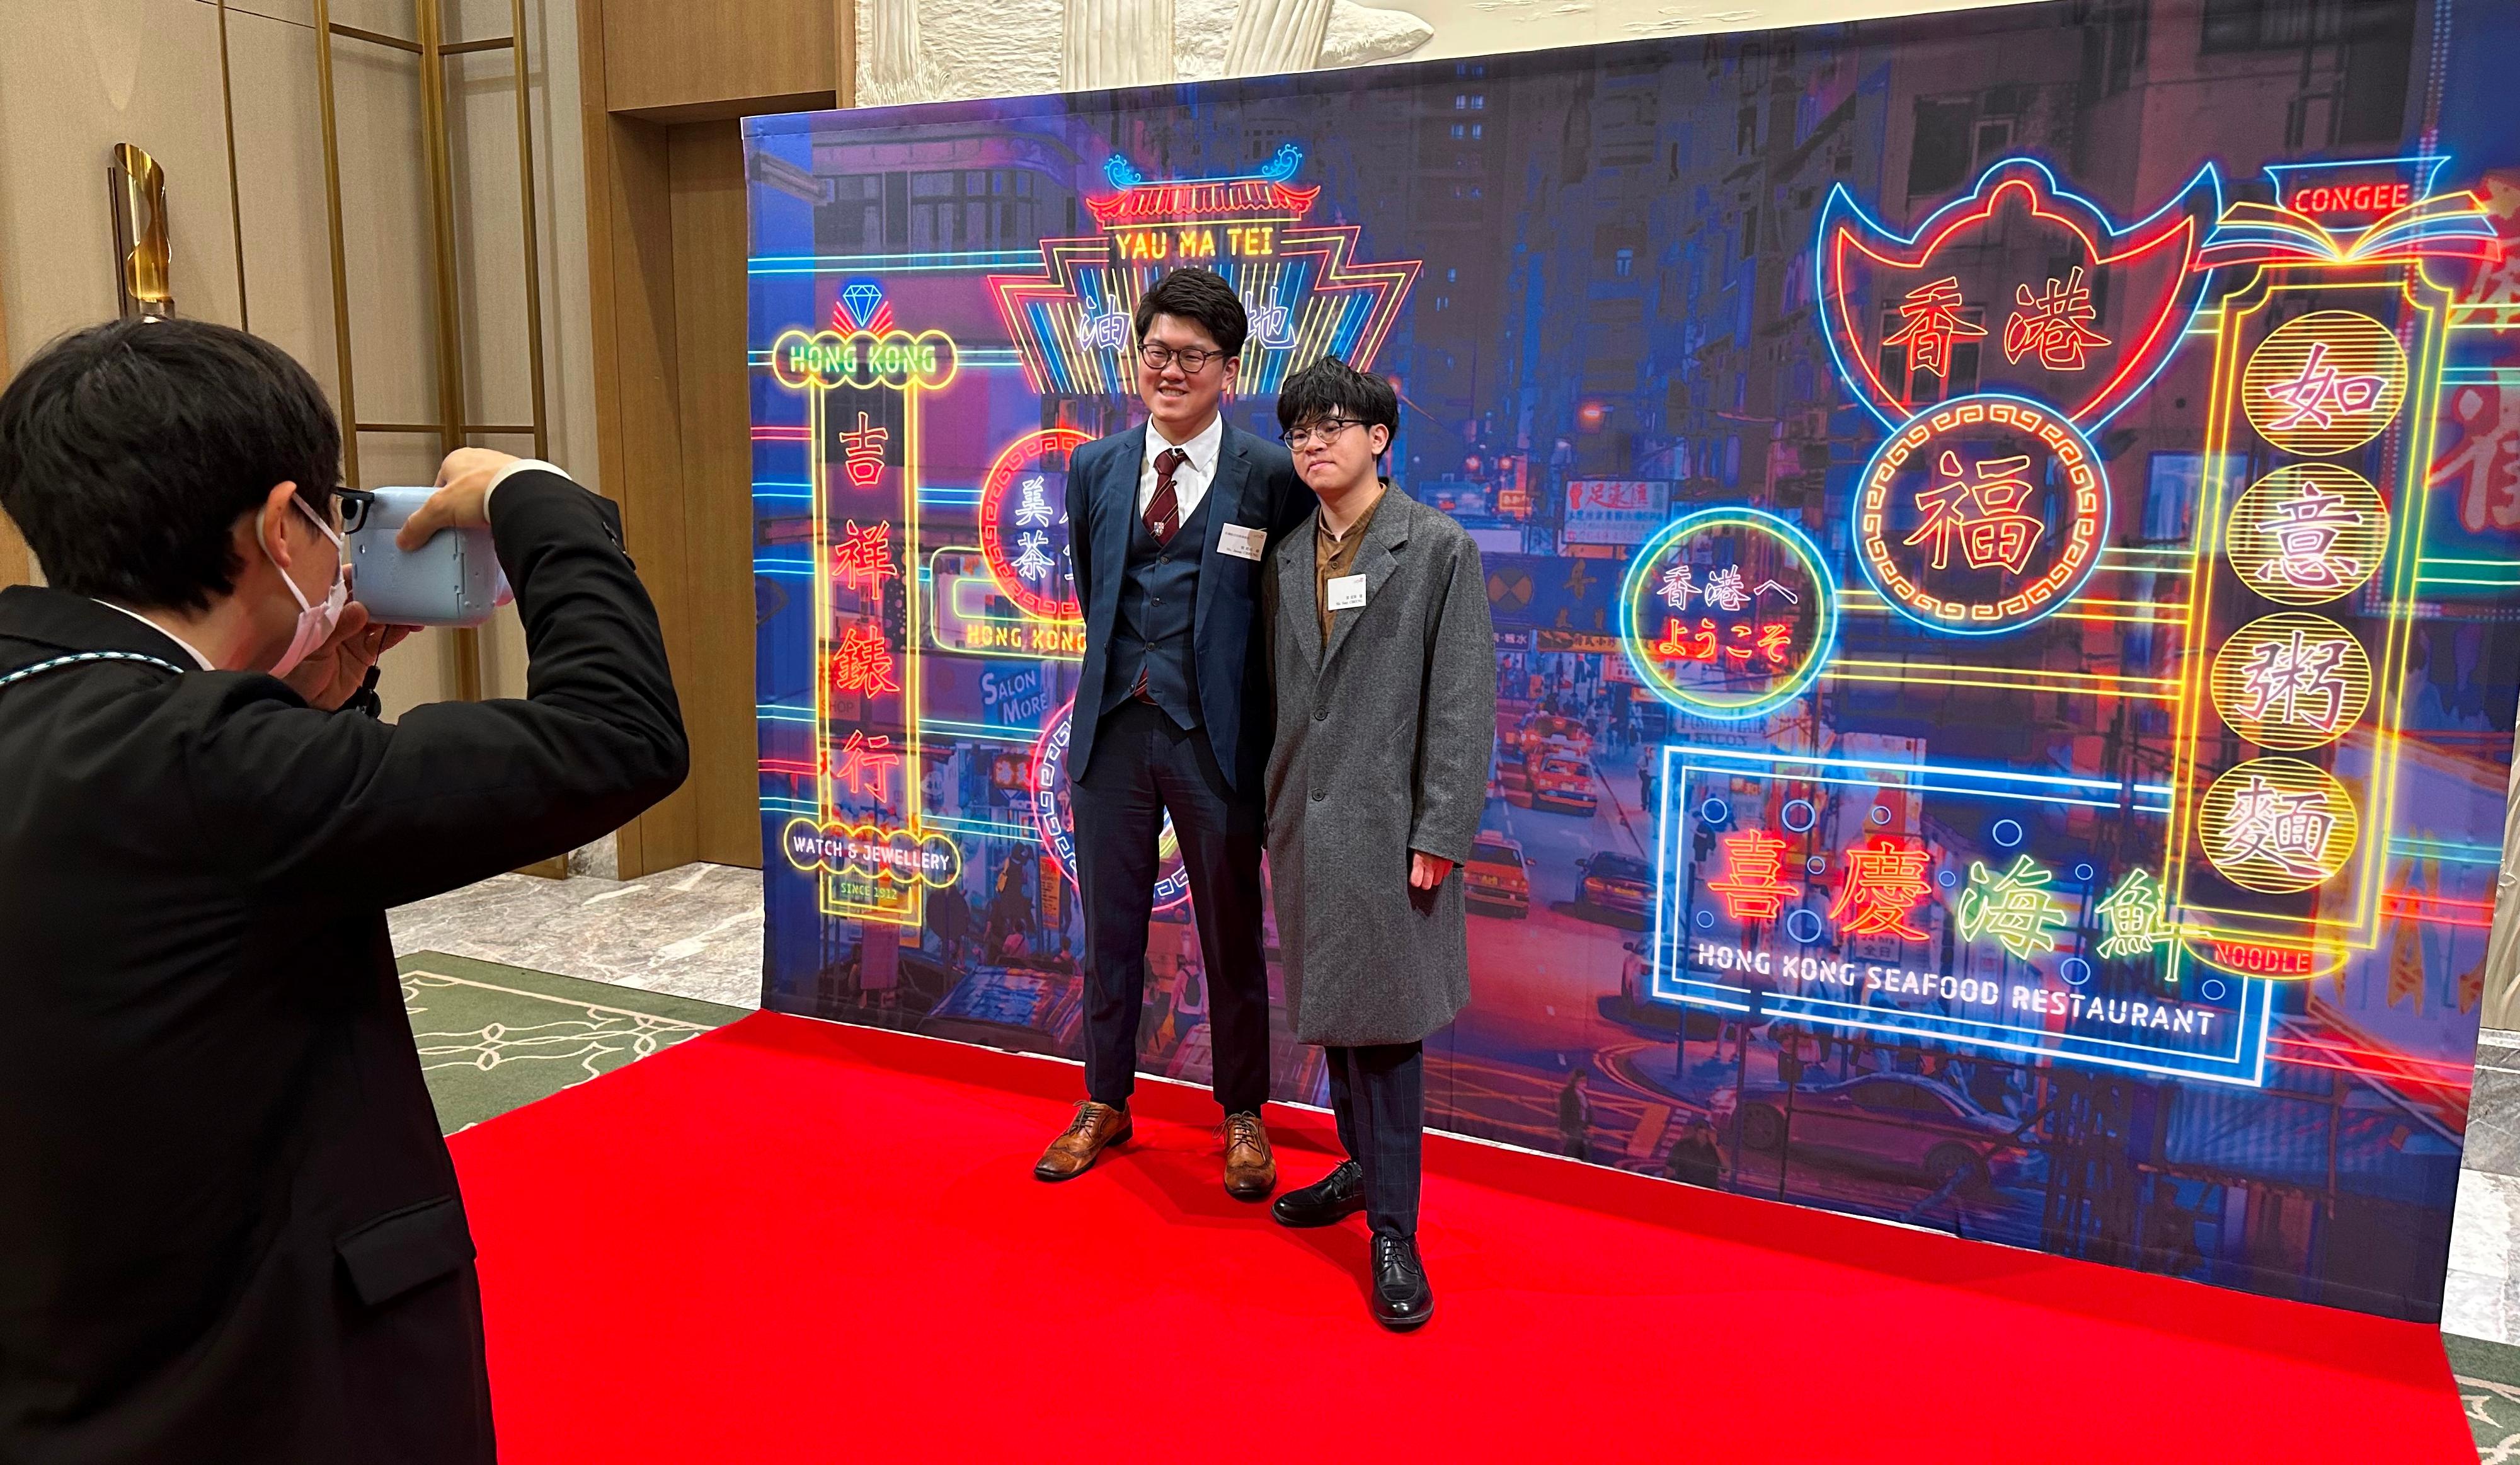 A neon light-themed backdrop with Hong Kong scenery was displayed at the venue of the spring reception held by the Hong Kong Economic and Trade Office (Tokyo) in Tokyo today (February 21) for guests to take photos.